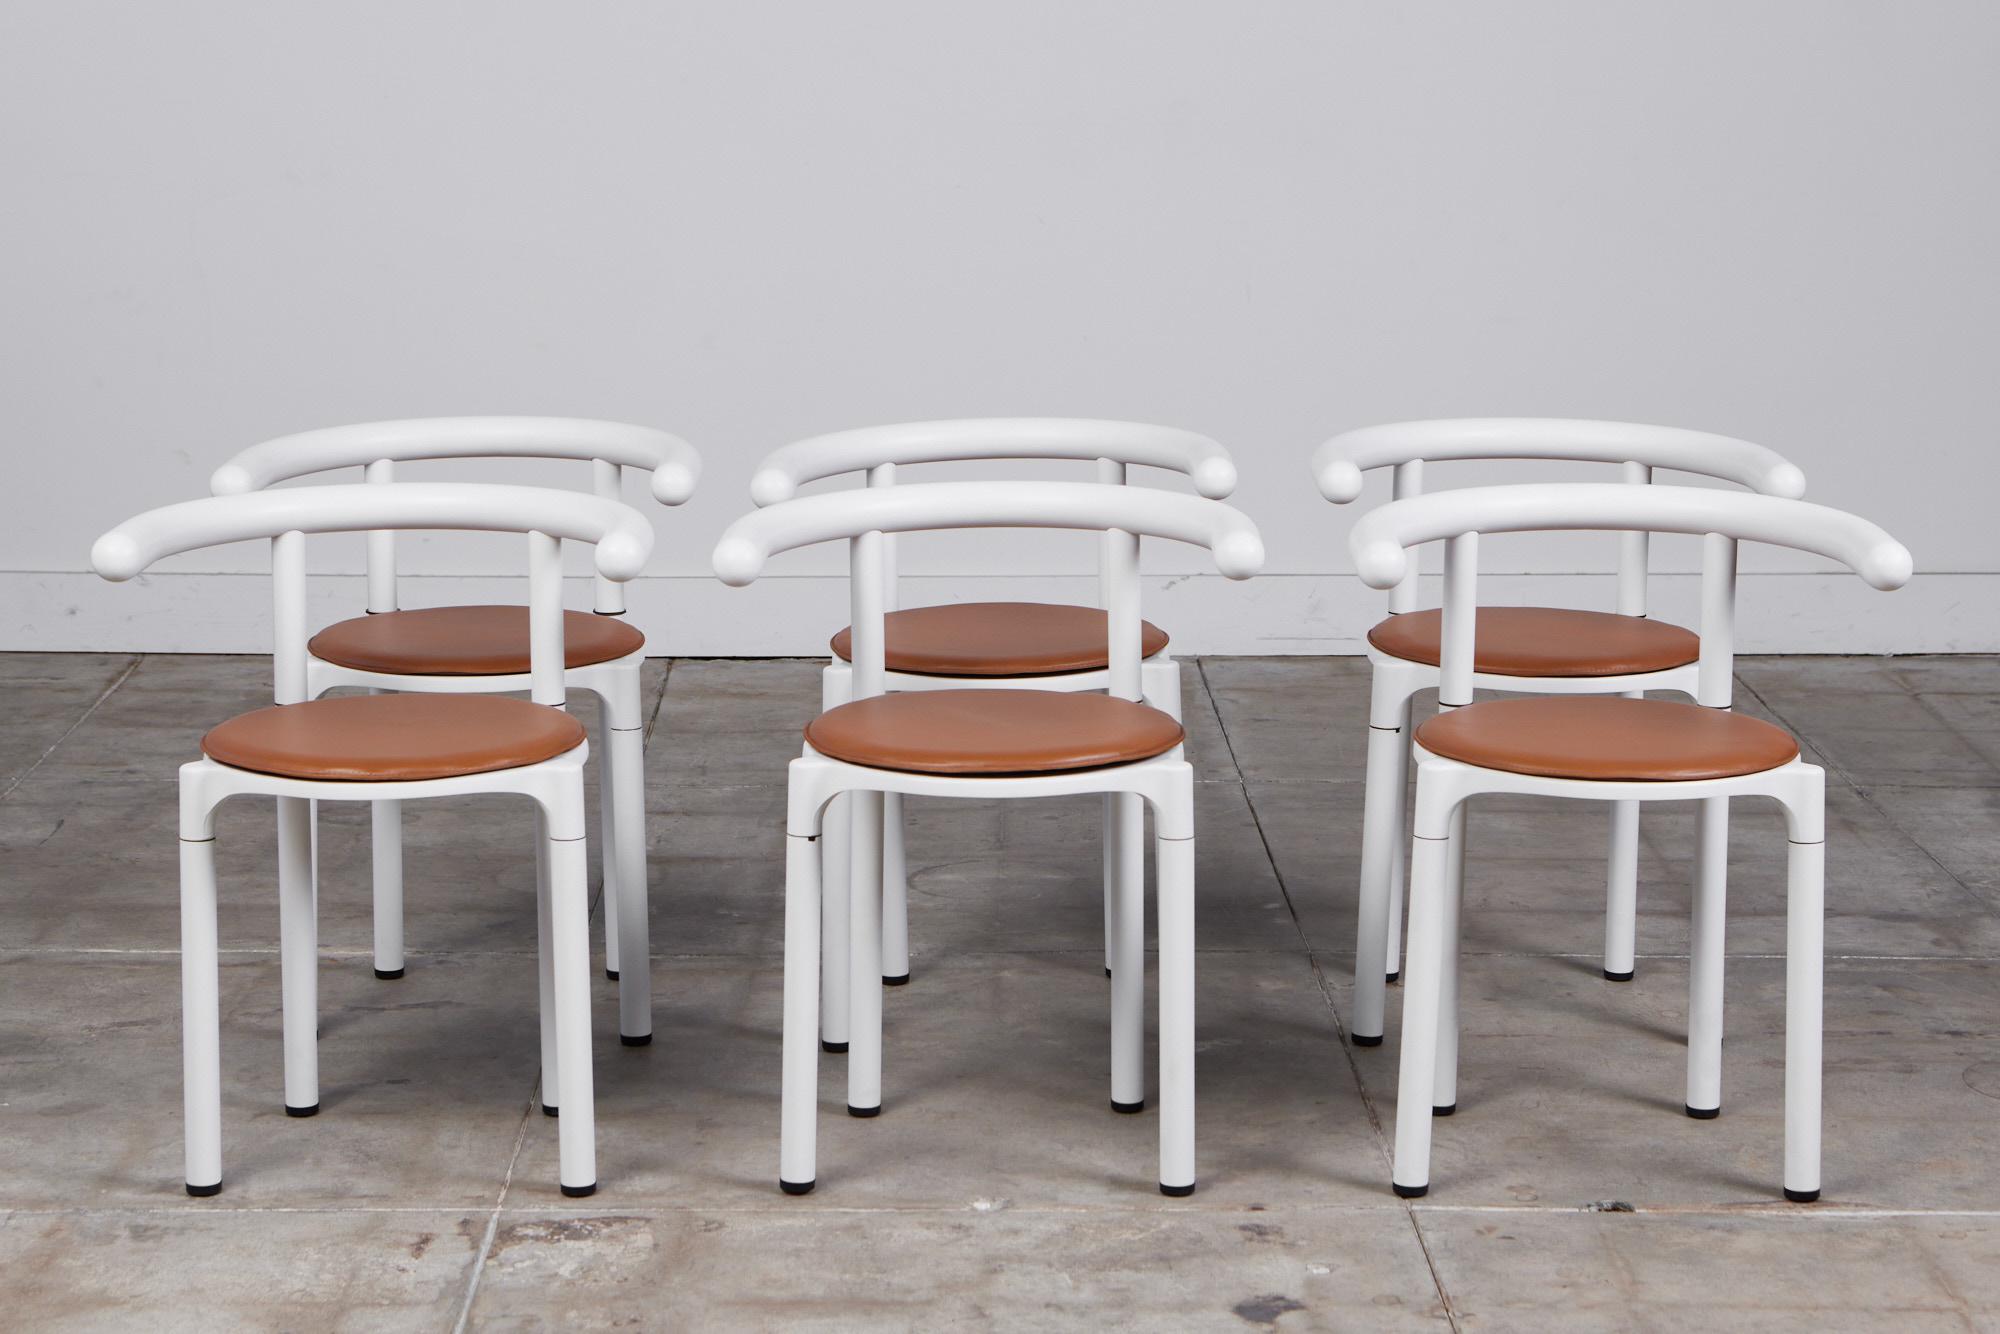 A set of six late modernist dining chairs from Italian design house Kartell. The 4855 model is a rarer edition of seating, designed in 1981 by the company’s co-founder and Art Director, Anna Castelli Ferrieri. Each chair has a round leather seat on